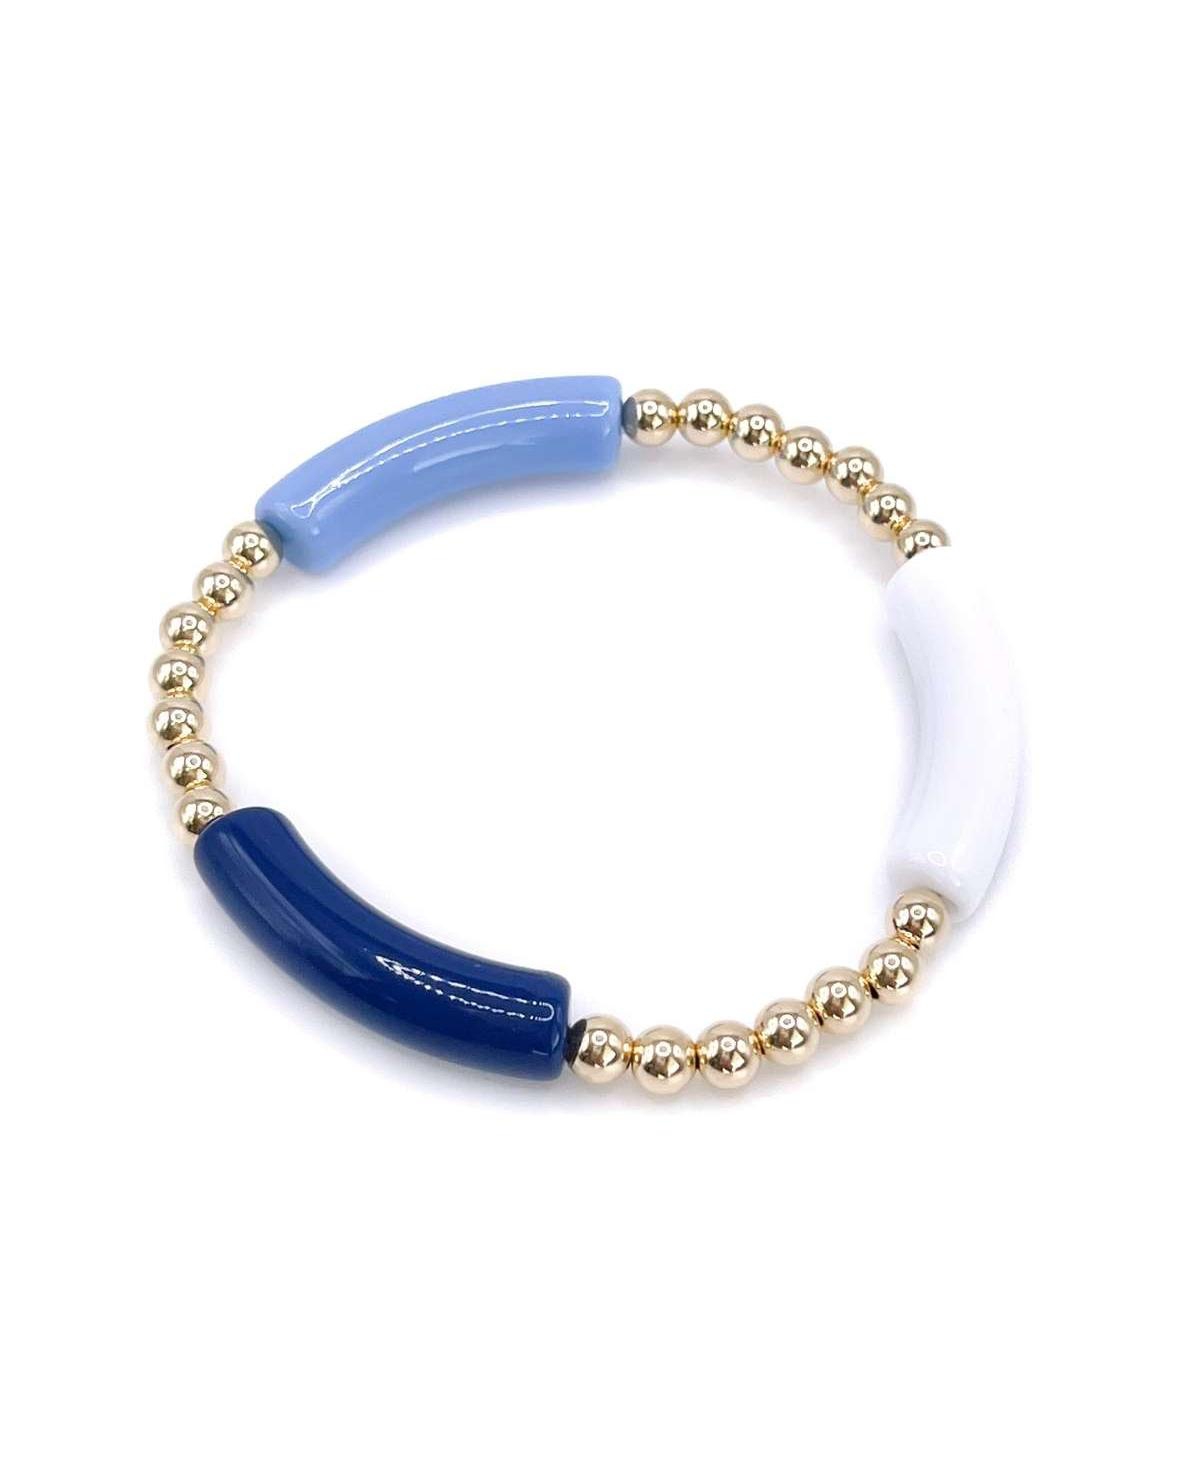 Non-Tarnishing Gold filled, 6mm Gold Ball and Acrylic Stretch Bracelet - Blue